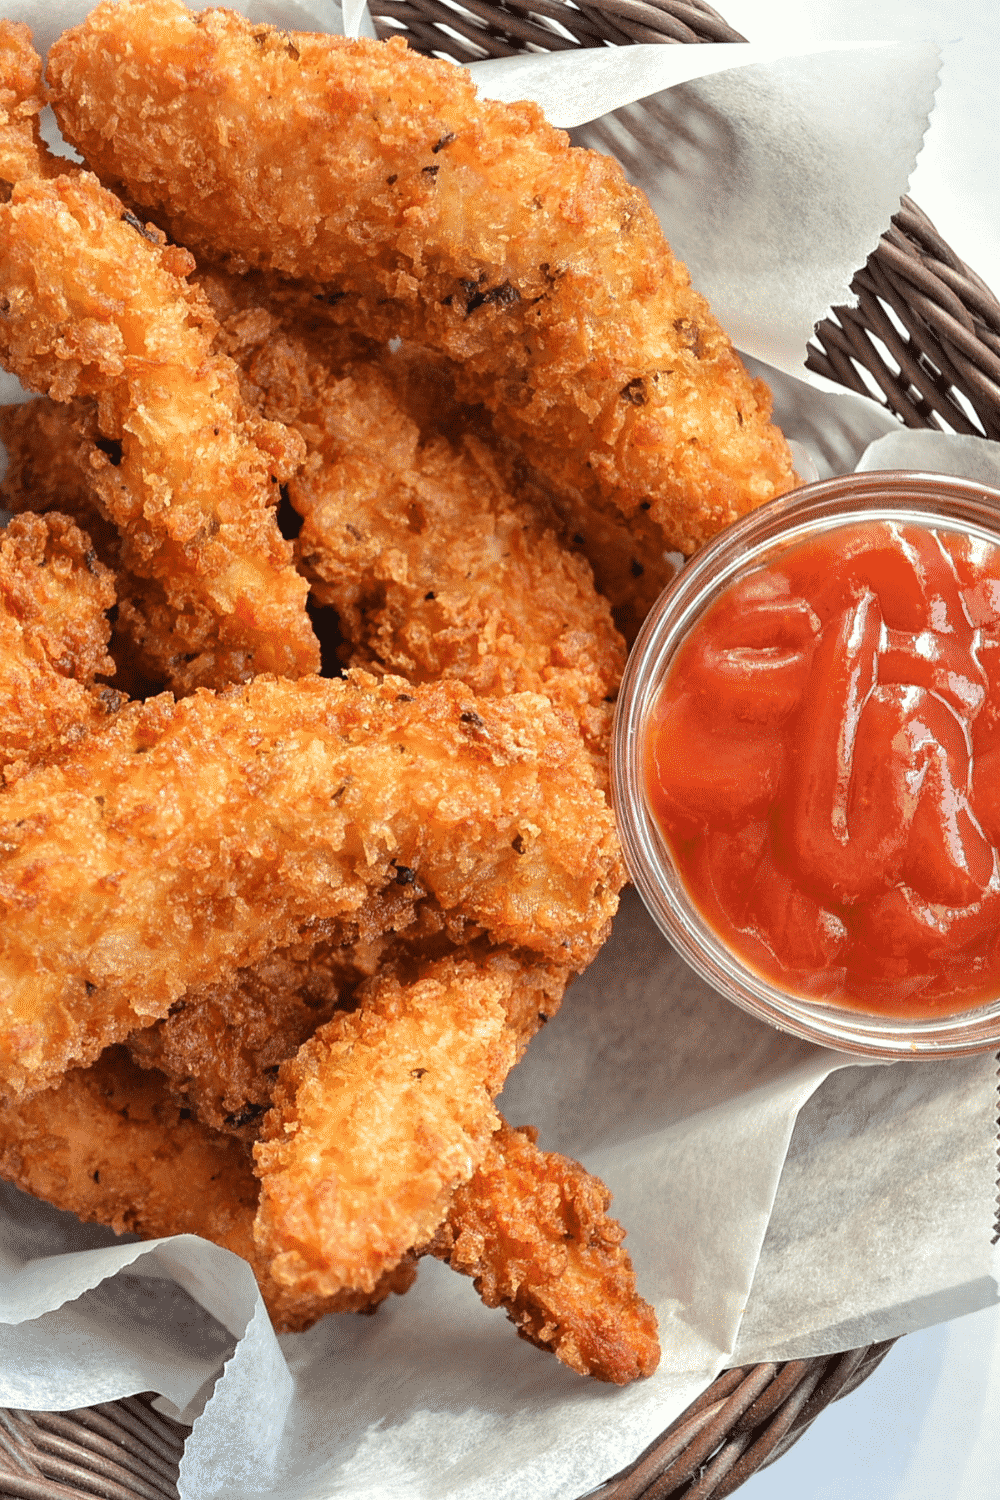 How to Cook Tyson Honey Battered Chicken Tenders in an Air Fryer